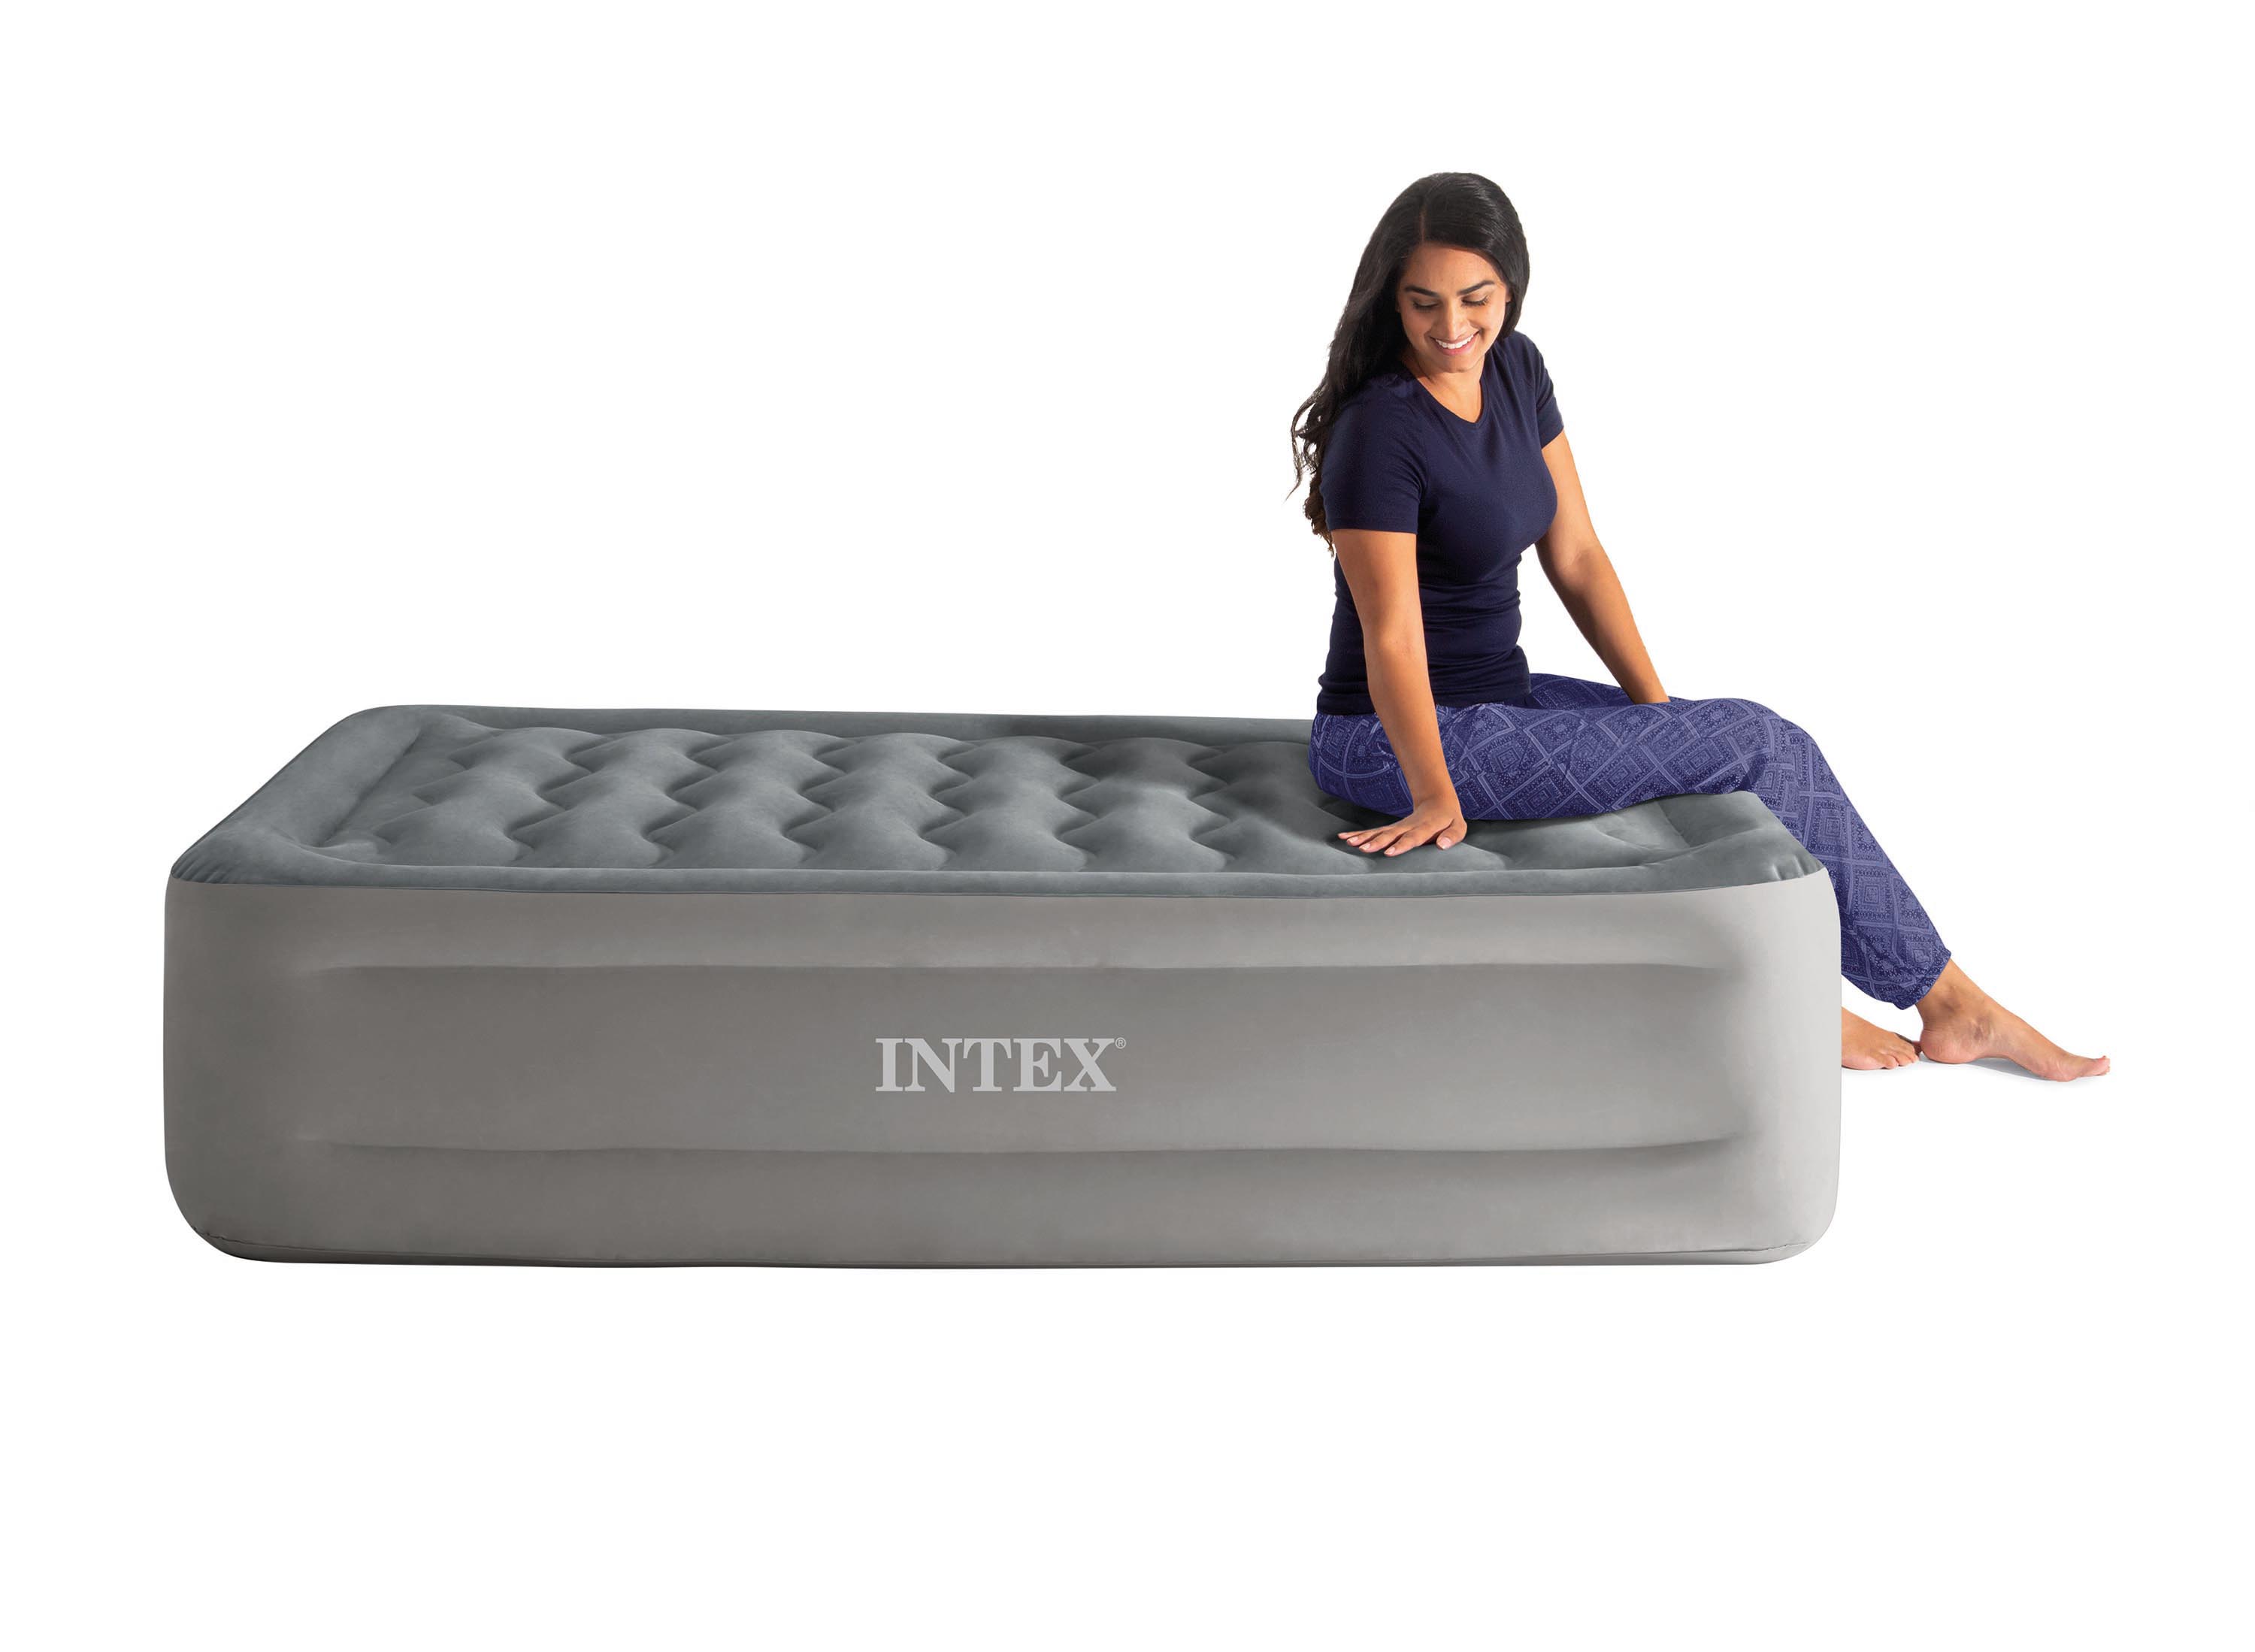 Intex 18" High Comfort Plush Raised Air Mattress Bed with Built-in Pump - Twin - image 4 of 16